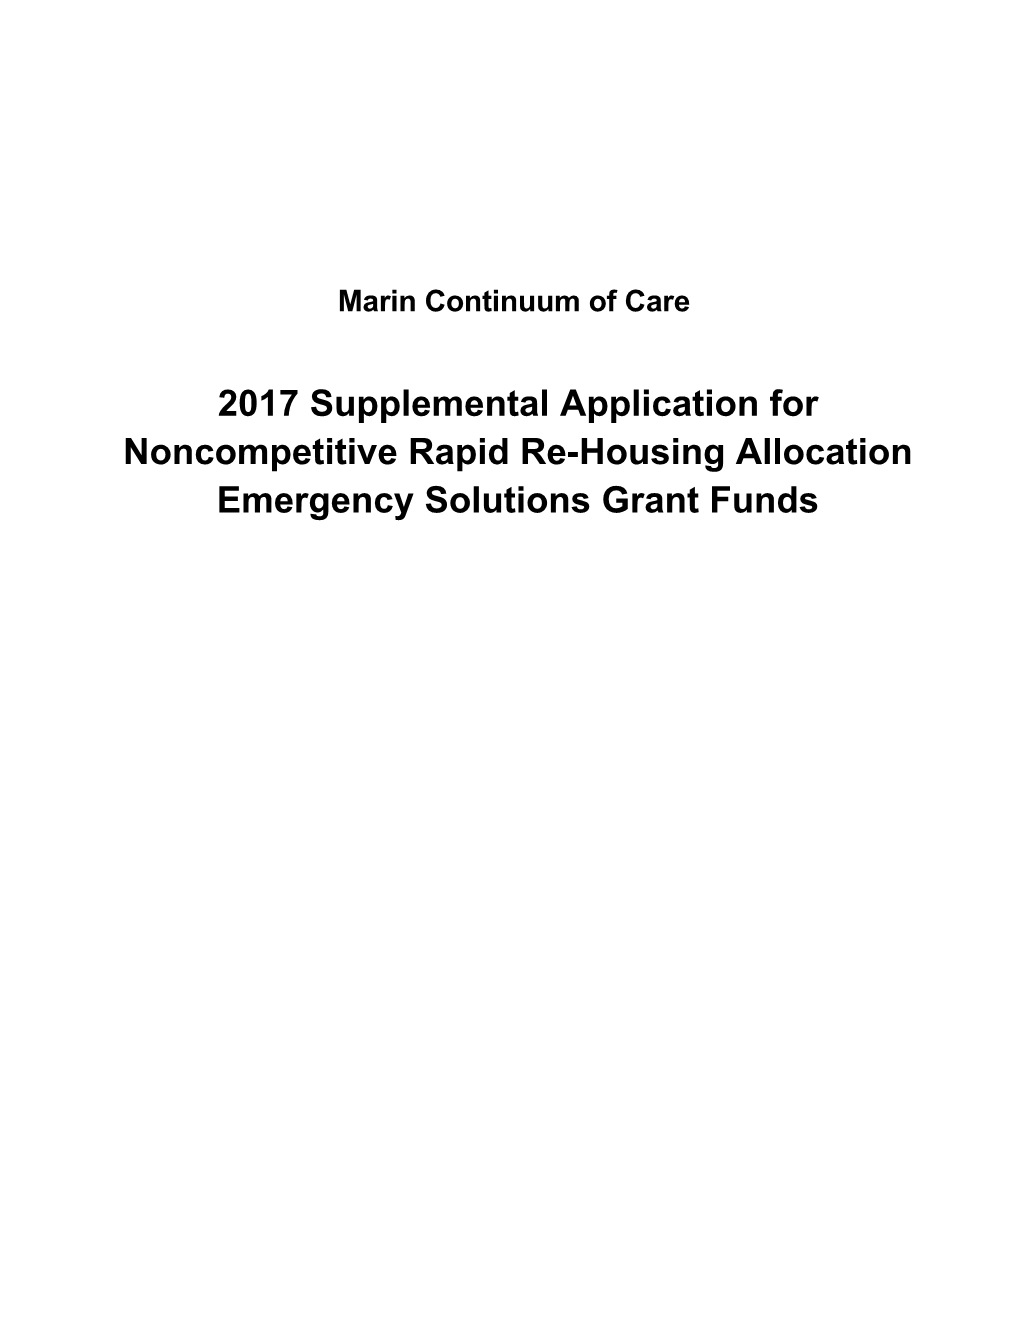 2017 Supplementalapplication for Noncompetitive Rapid Re-Housing Allocation Emergency